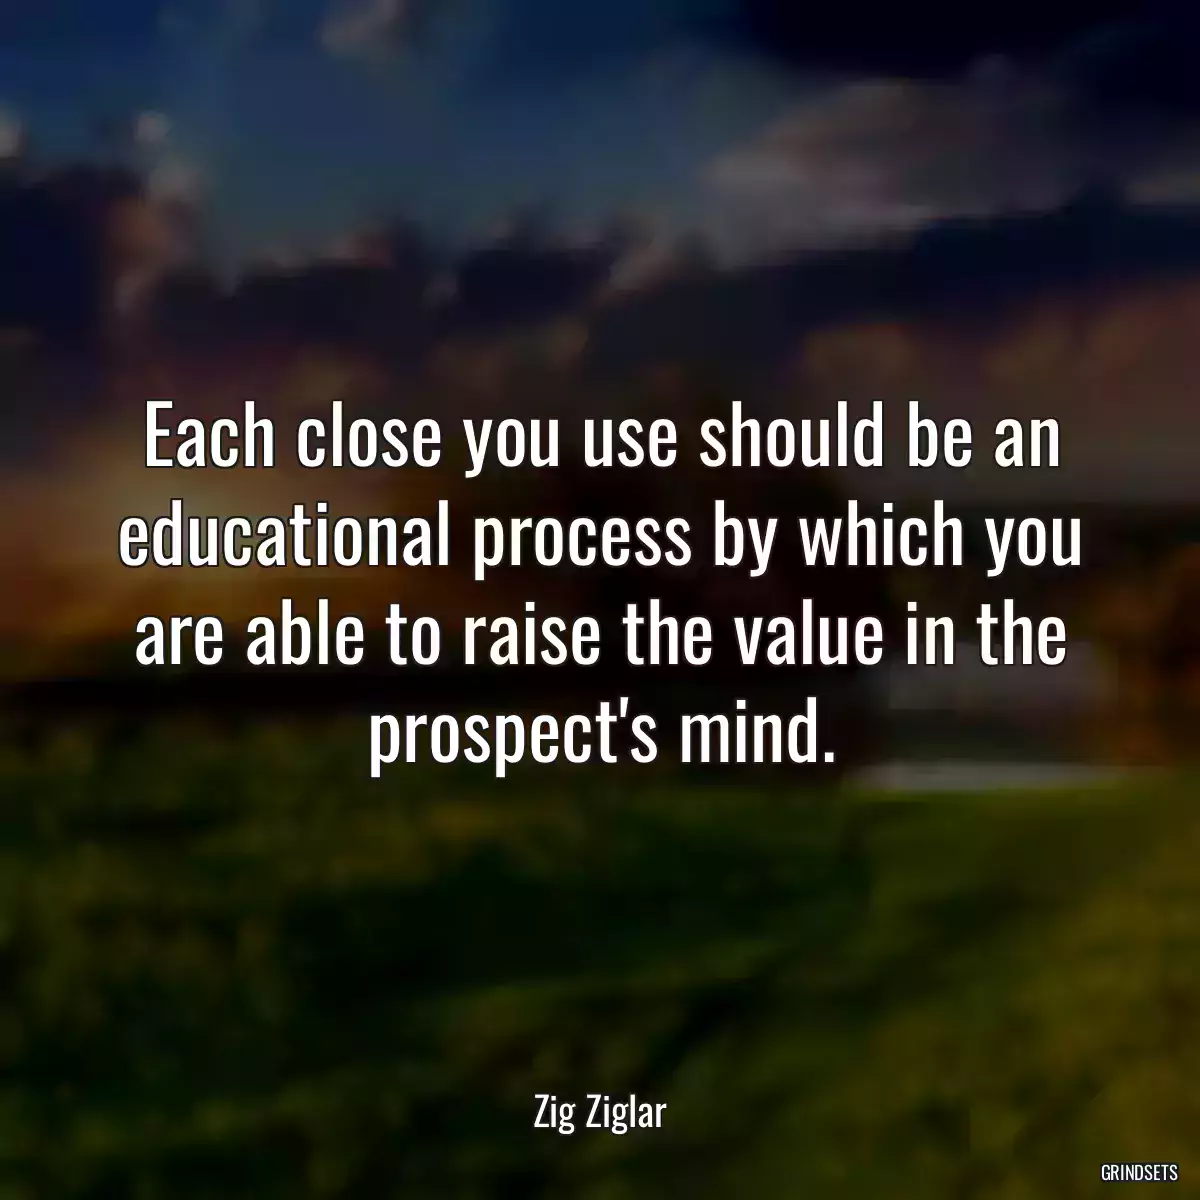 Each close you use should be an educational process by which you are able to raise the value in the prospect\'s mind.